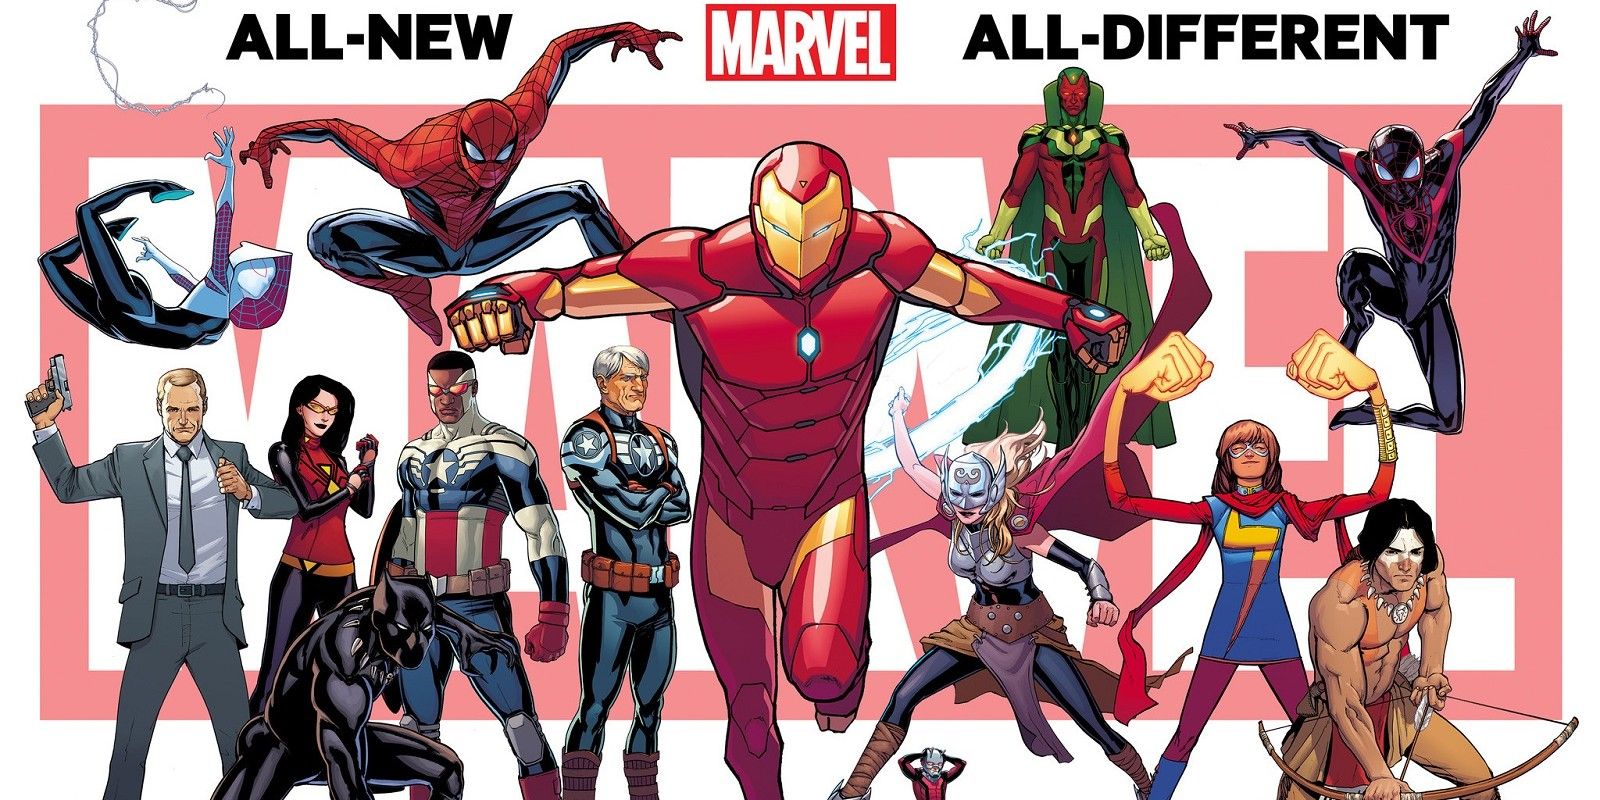 Marvel Comics All New All Different lineup